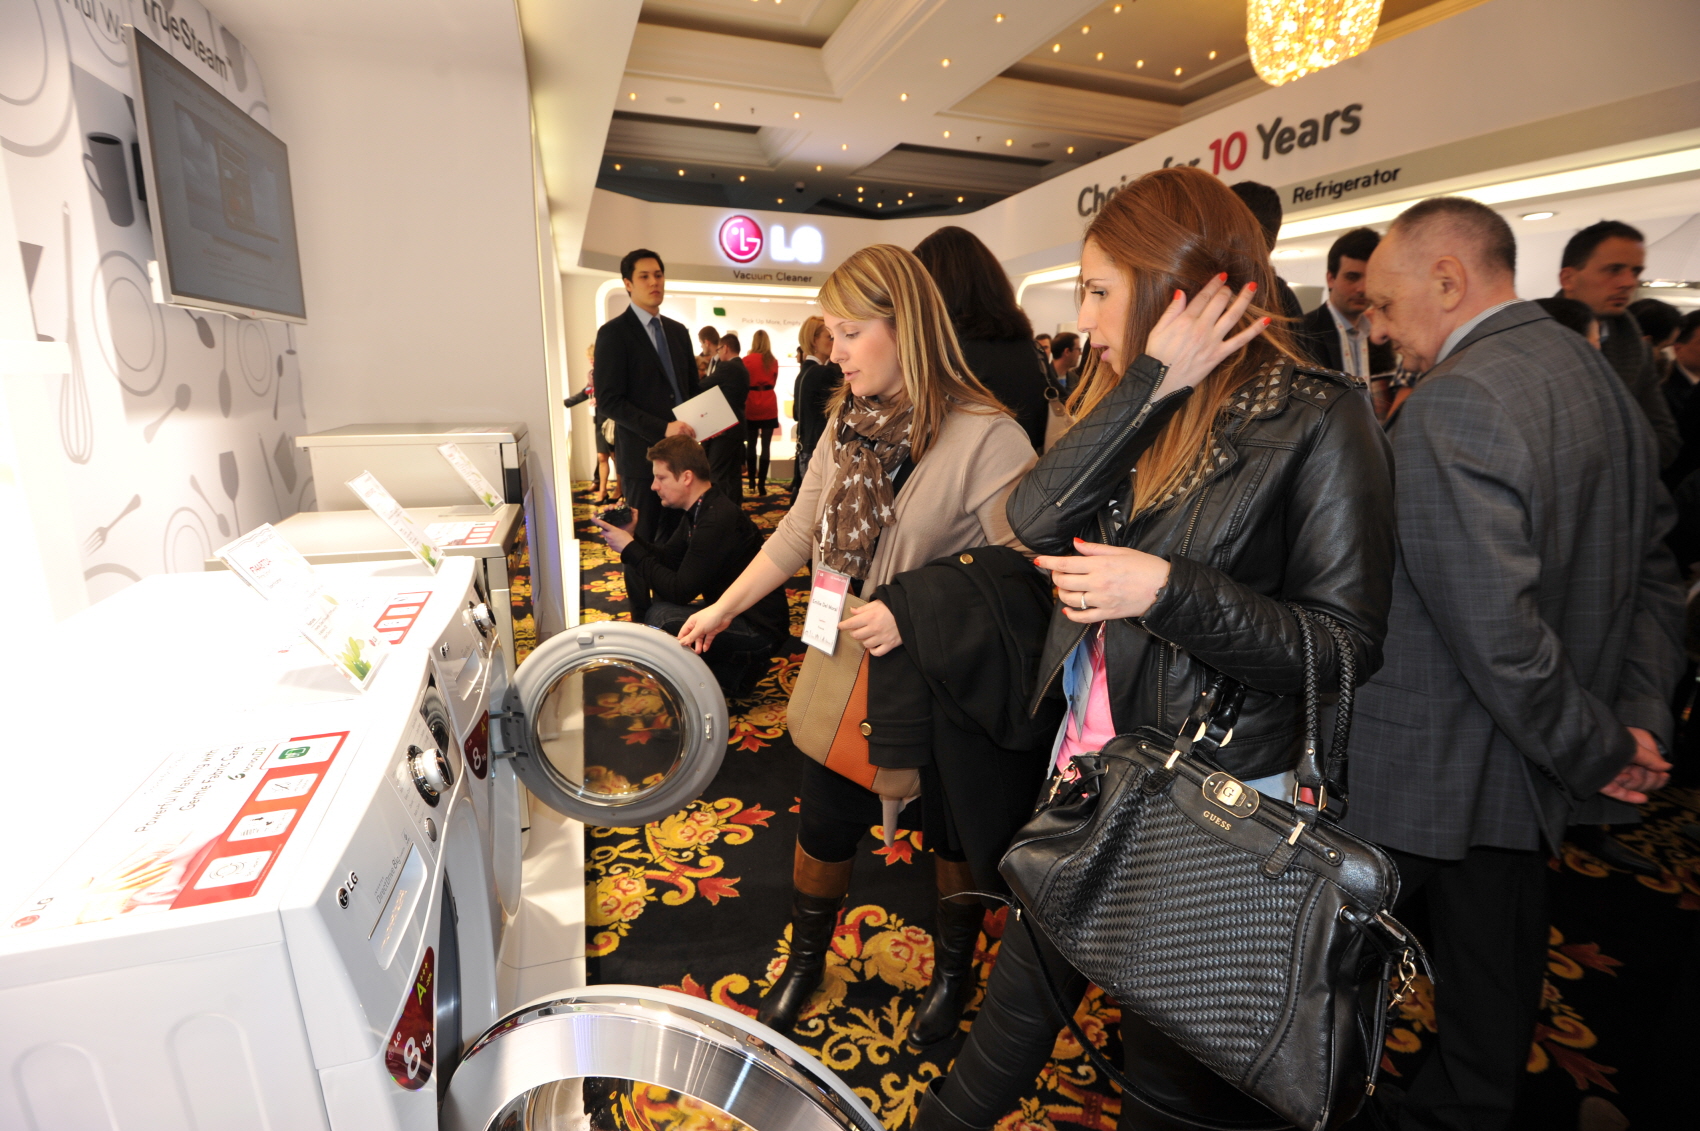 LG Innofest 2013 visitors take a closer look at LG’s innovative products, including its washing machines